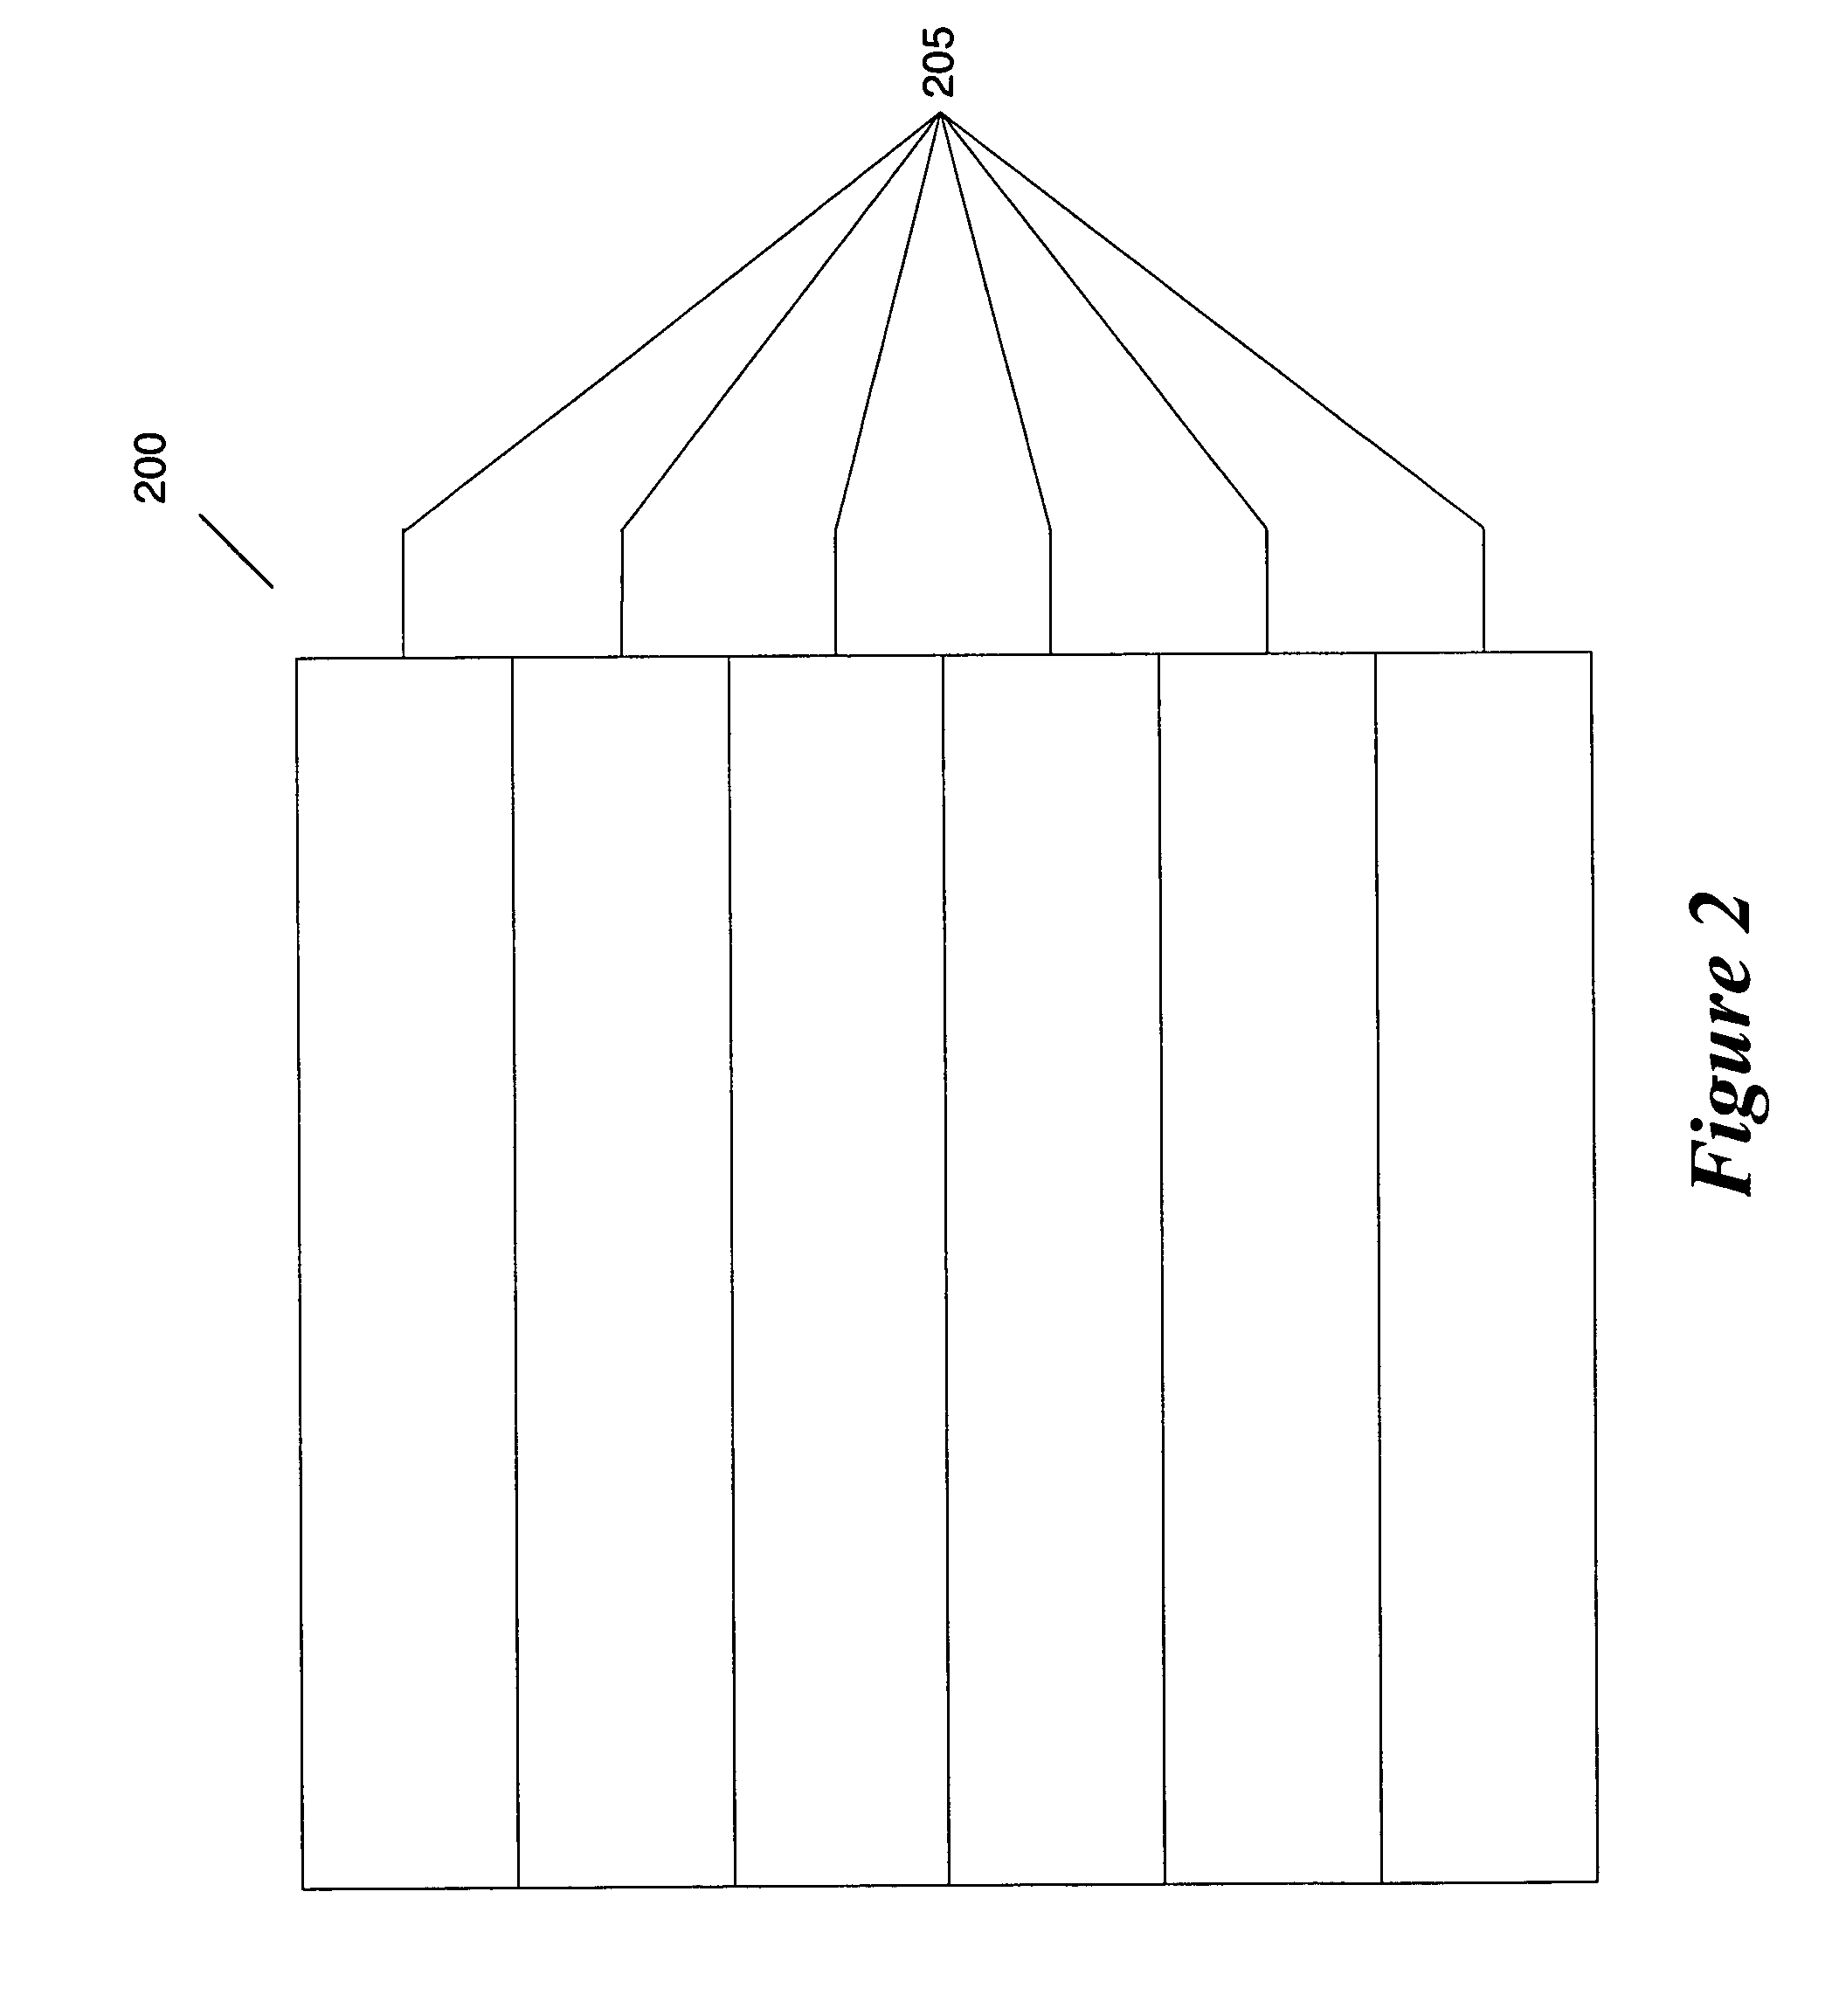 Configurable IC with packet switch configuration network